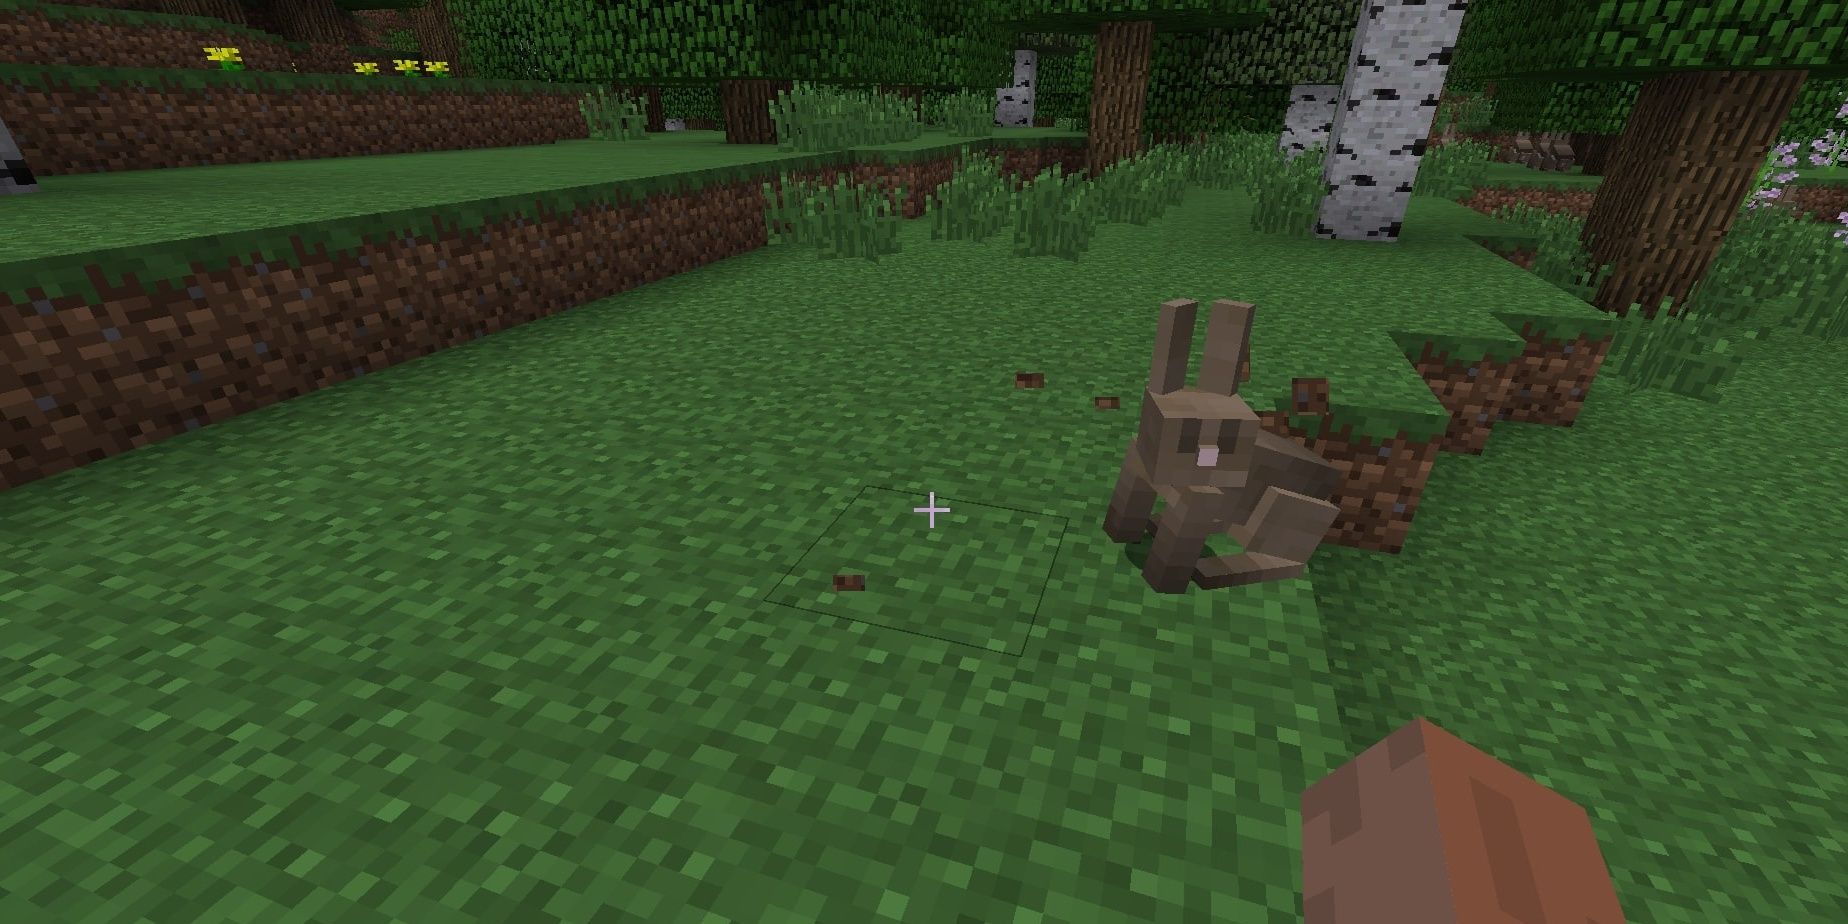 A brown bunny in Minecraft